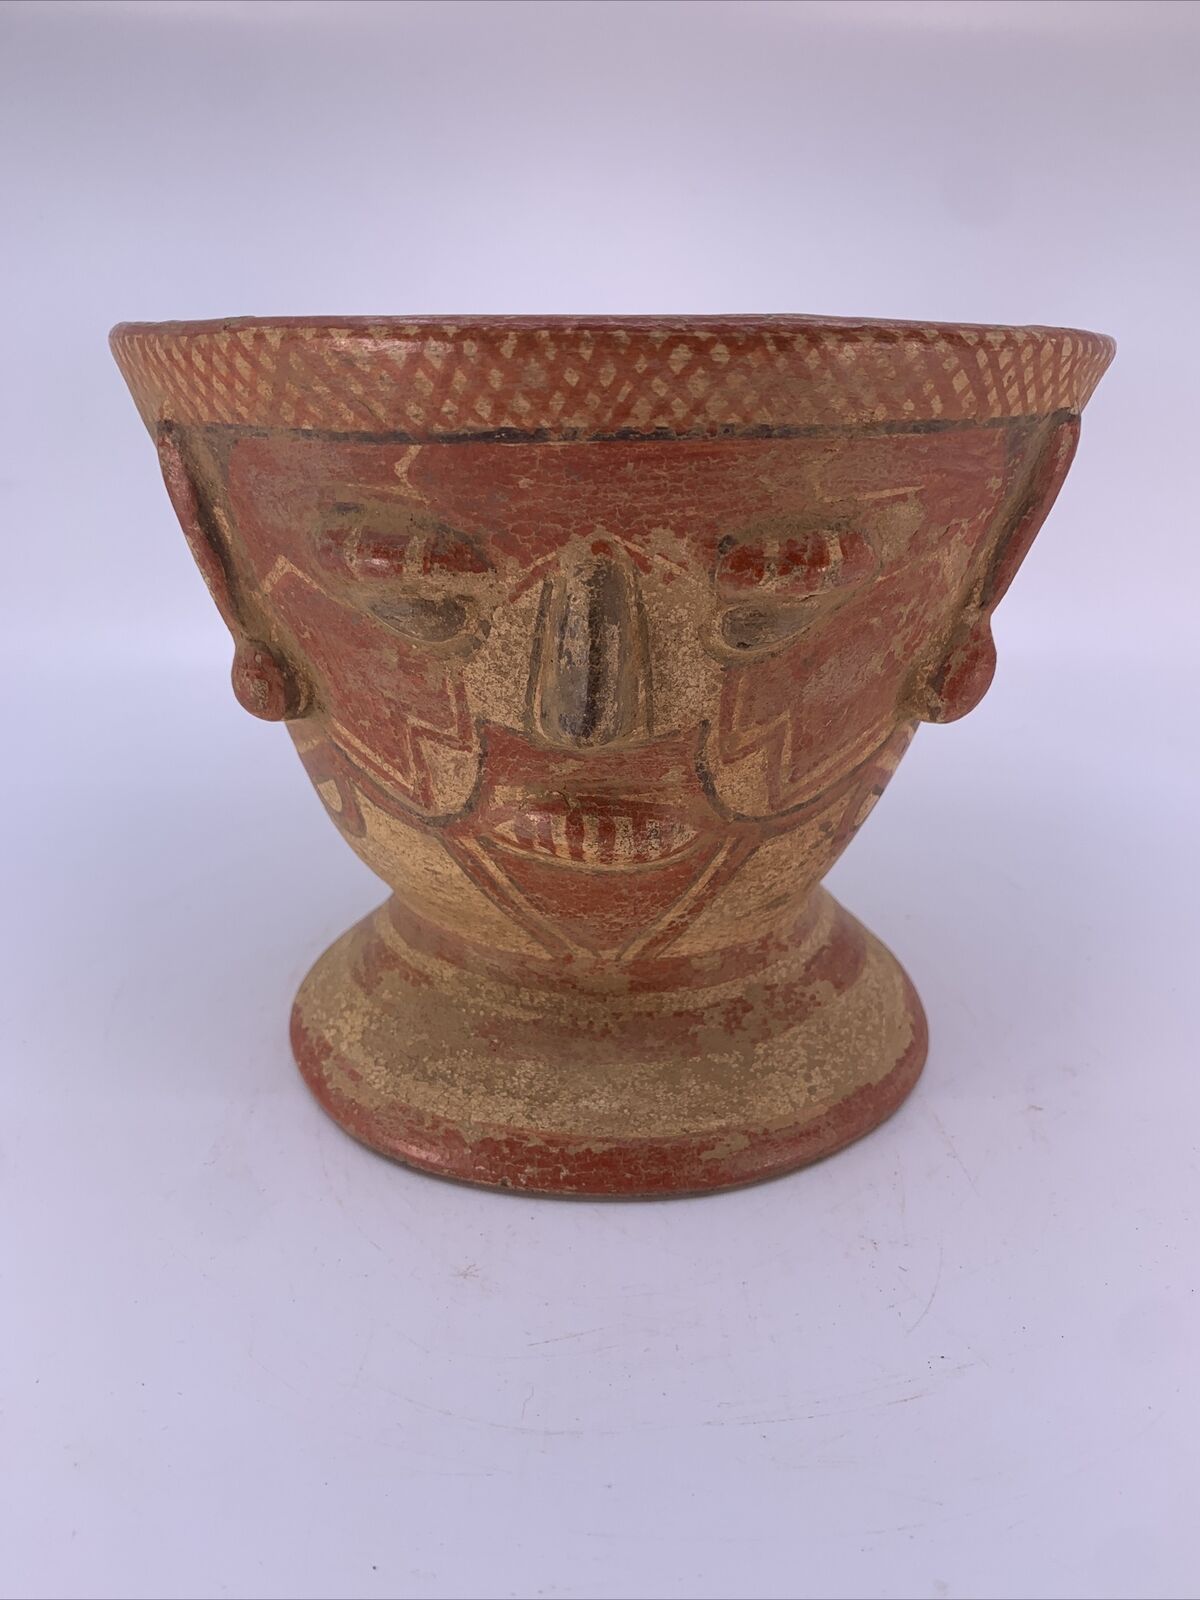 Pre Columbian, Authentic Artifact, Ceramic/Pottery, Poly-Chrome, Eclipse Vessel